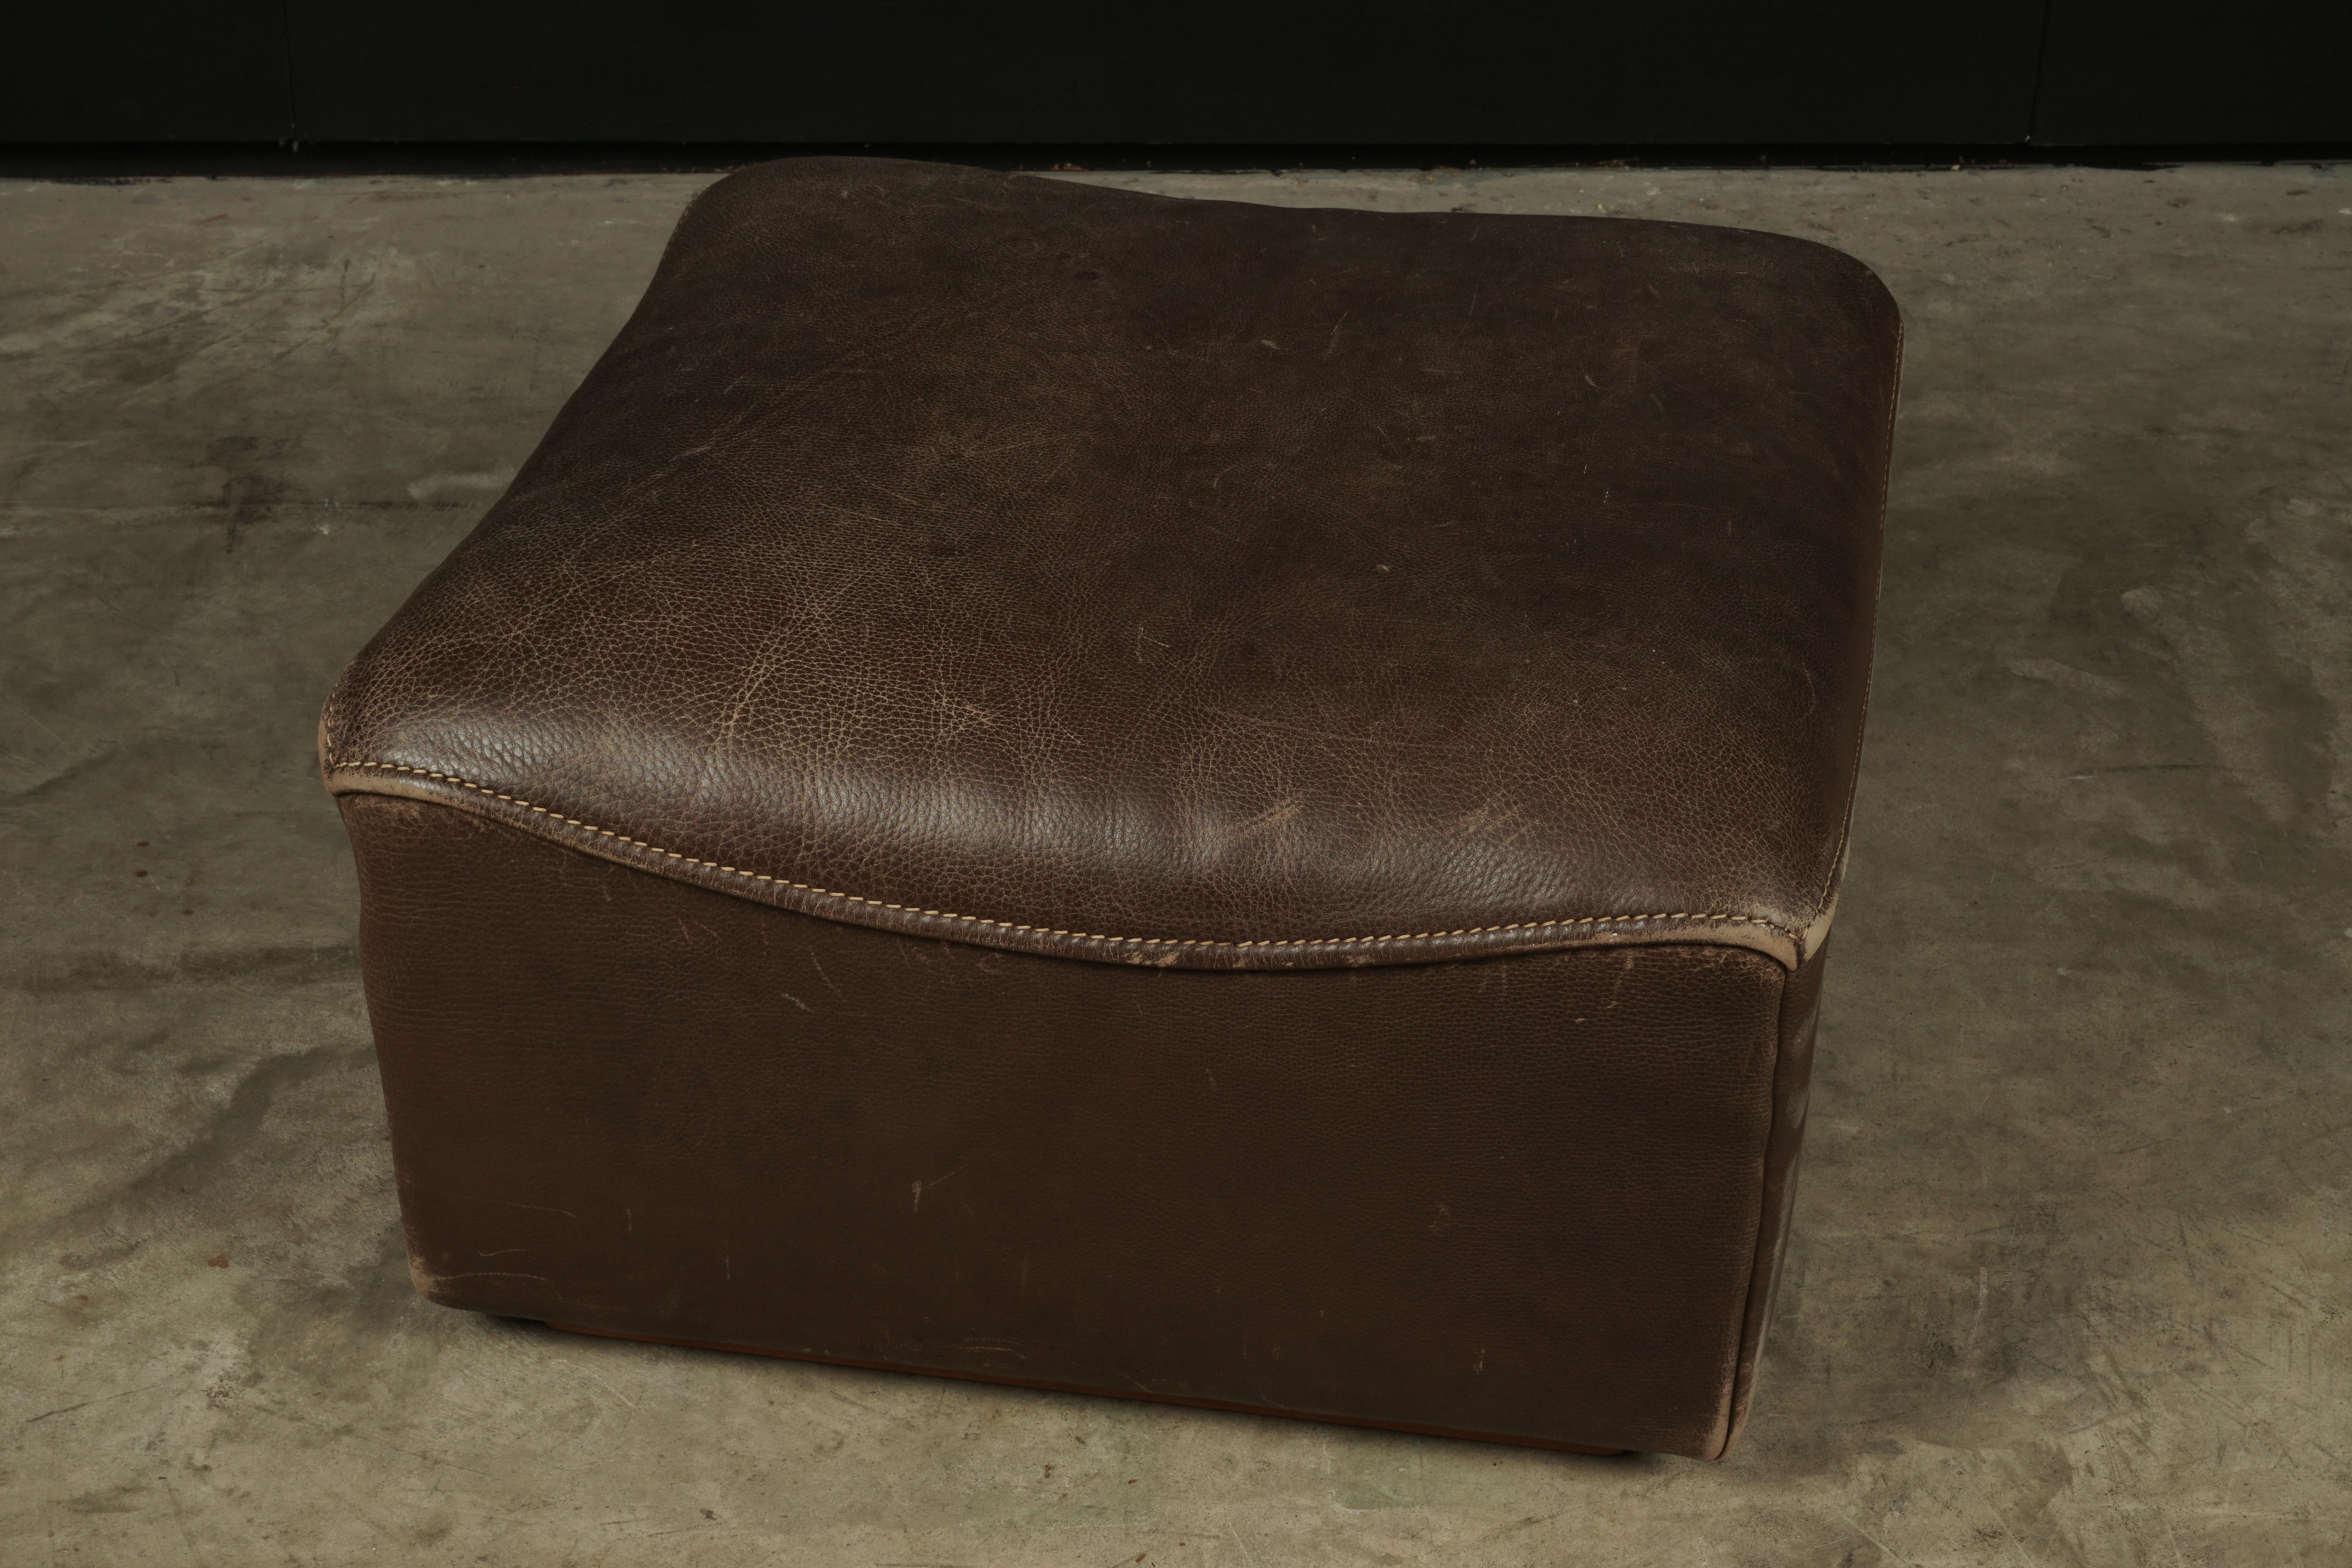 Late 20th Century Vintage De Sede 'Ds-15' Modular Sofa in Brown Buffalo Leather from Switzerland